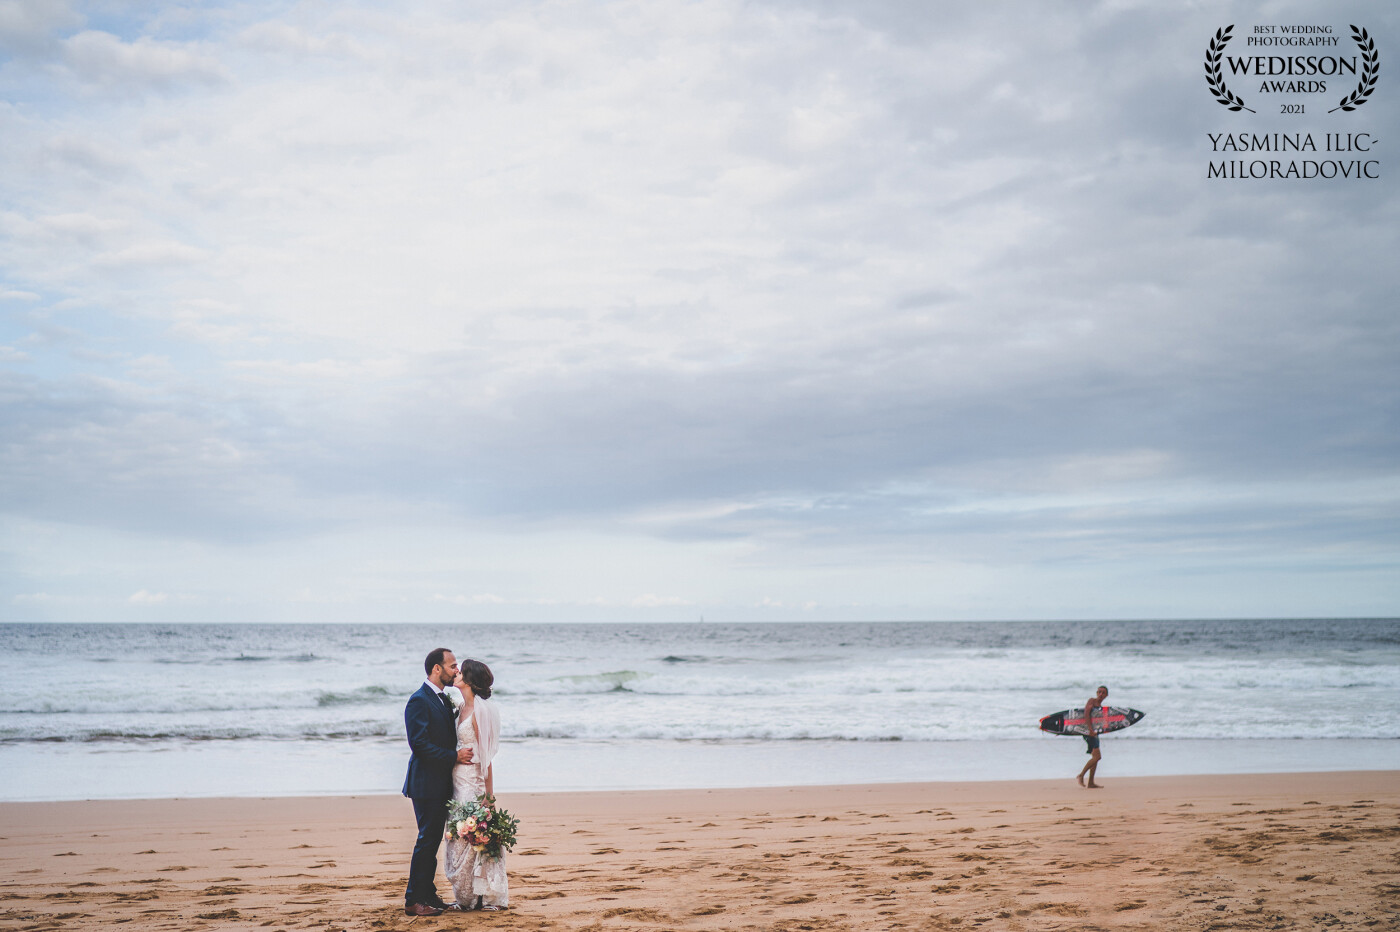 These two lovebirds married in February just after a mountain of storms. The day itself was perfect and really brought two families and cultures together. <br />
This image sums up their life... together, on the Northern Beaches of Sydney.